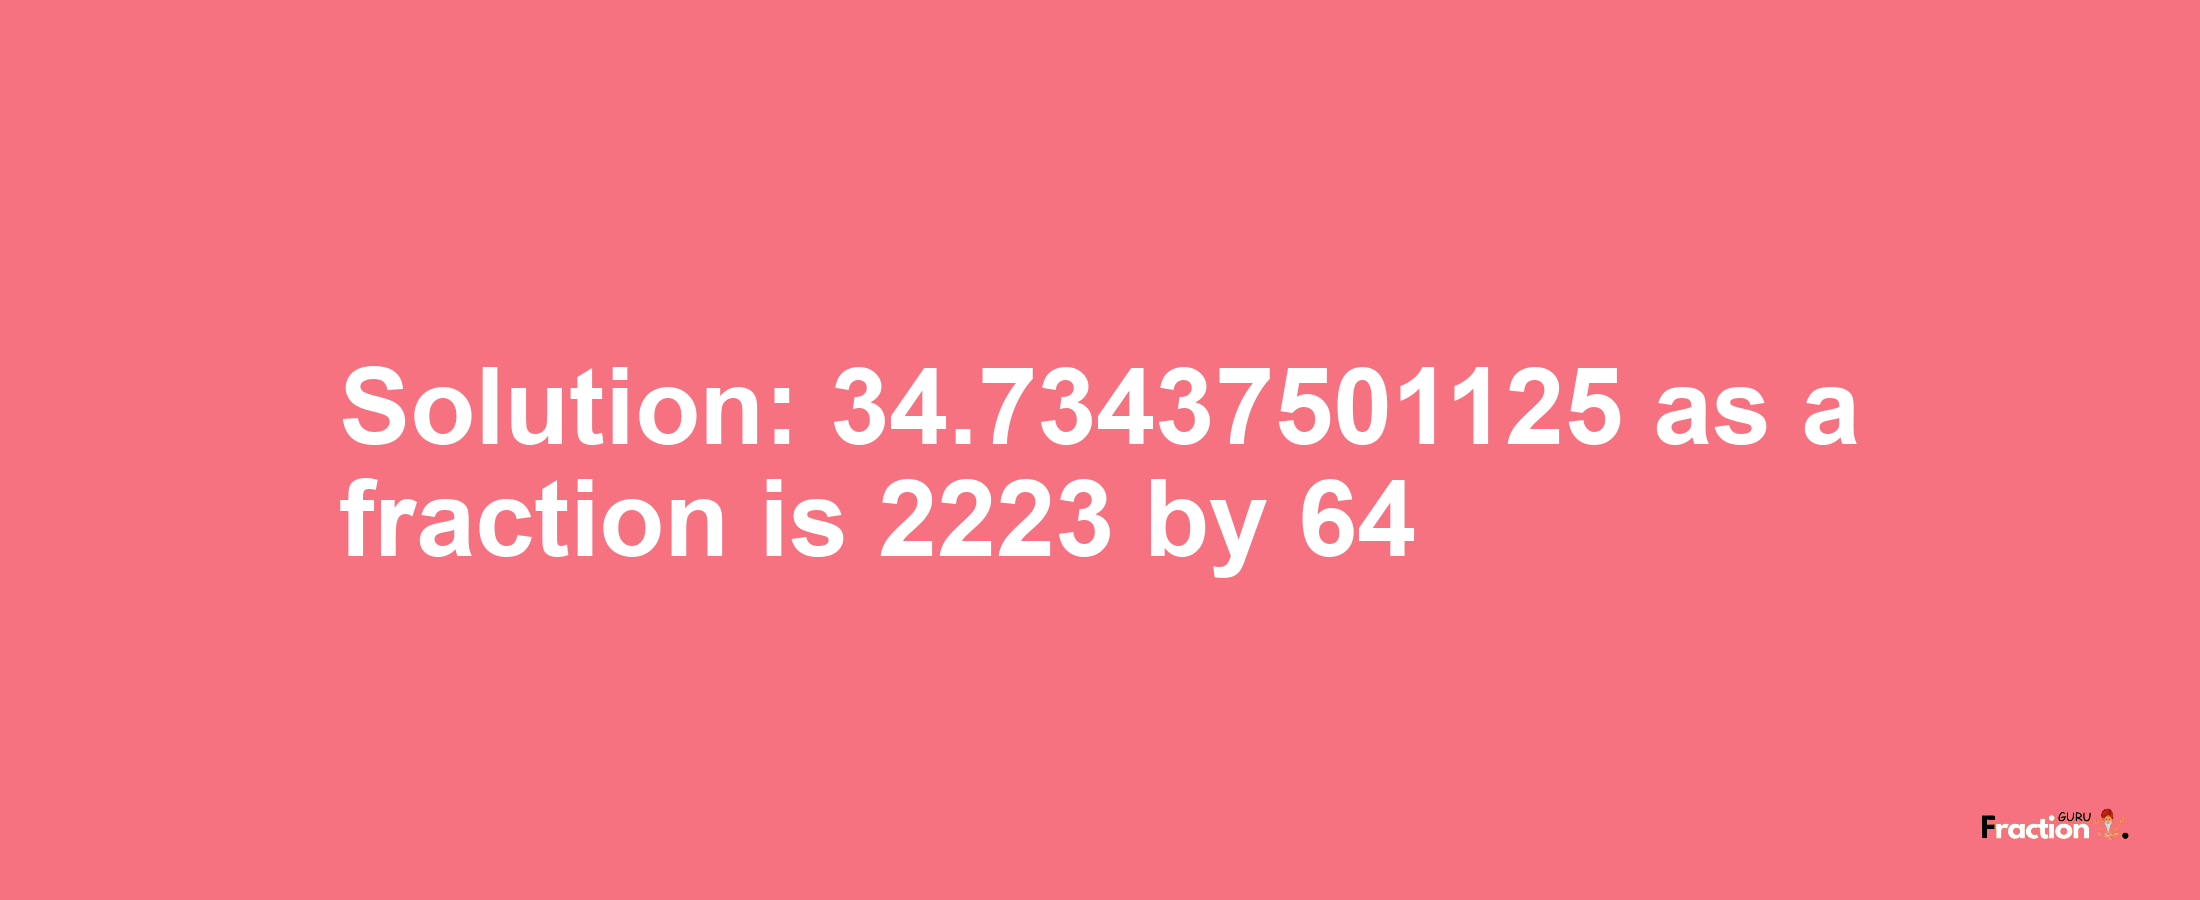 Solution:34.73437501125 as a fraction is 2223/64